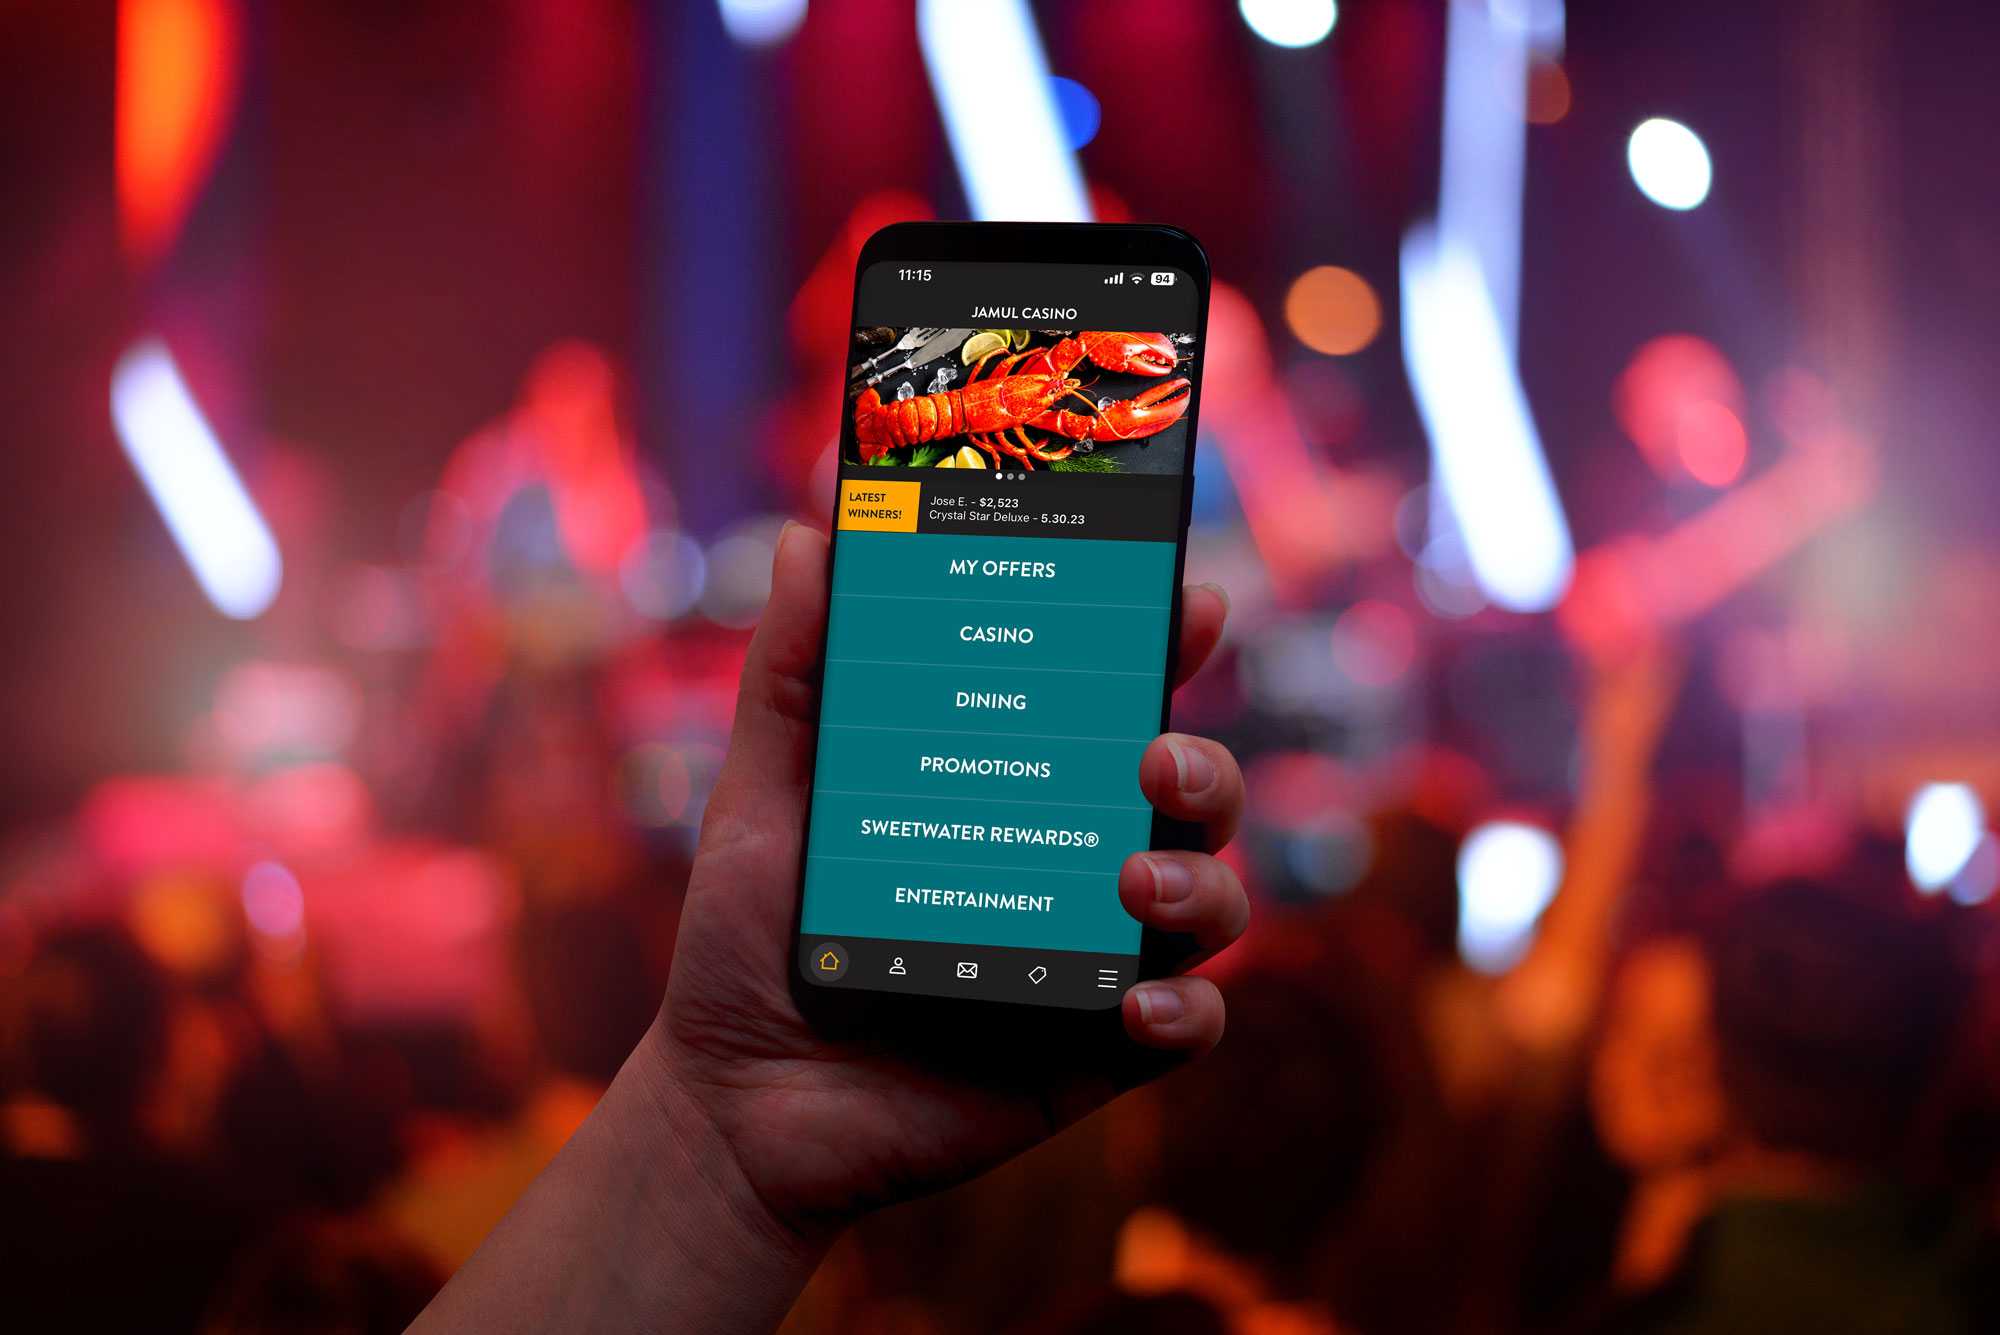 Jamul Casino app open on a phone at a concert.